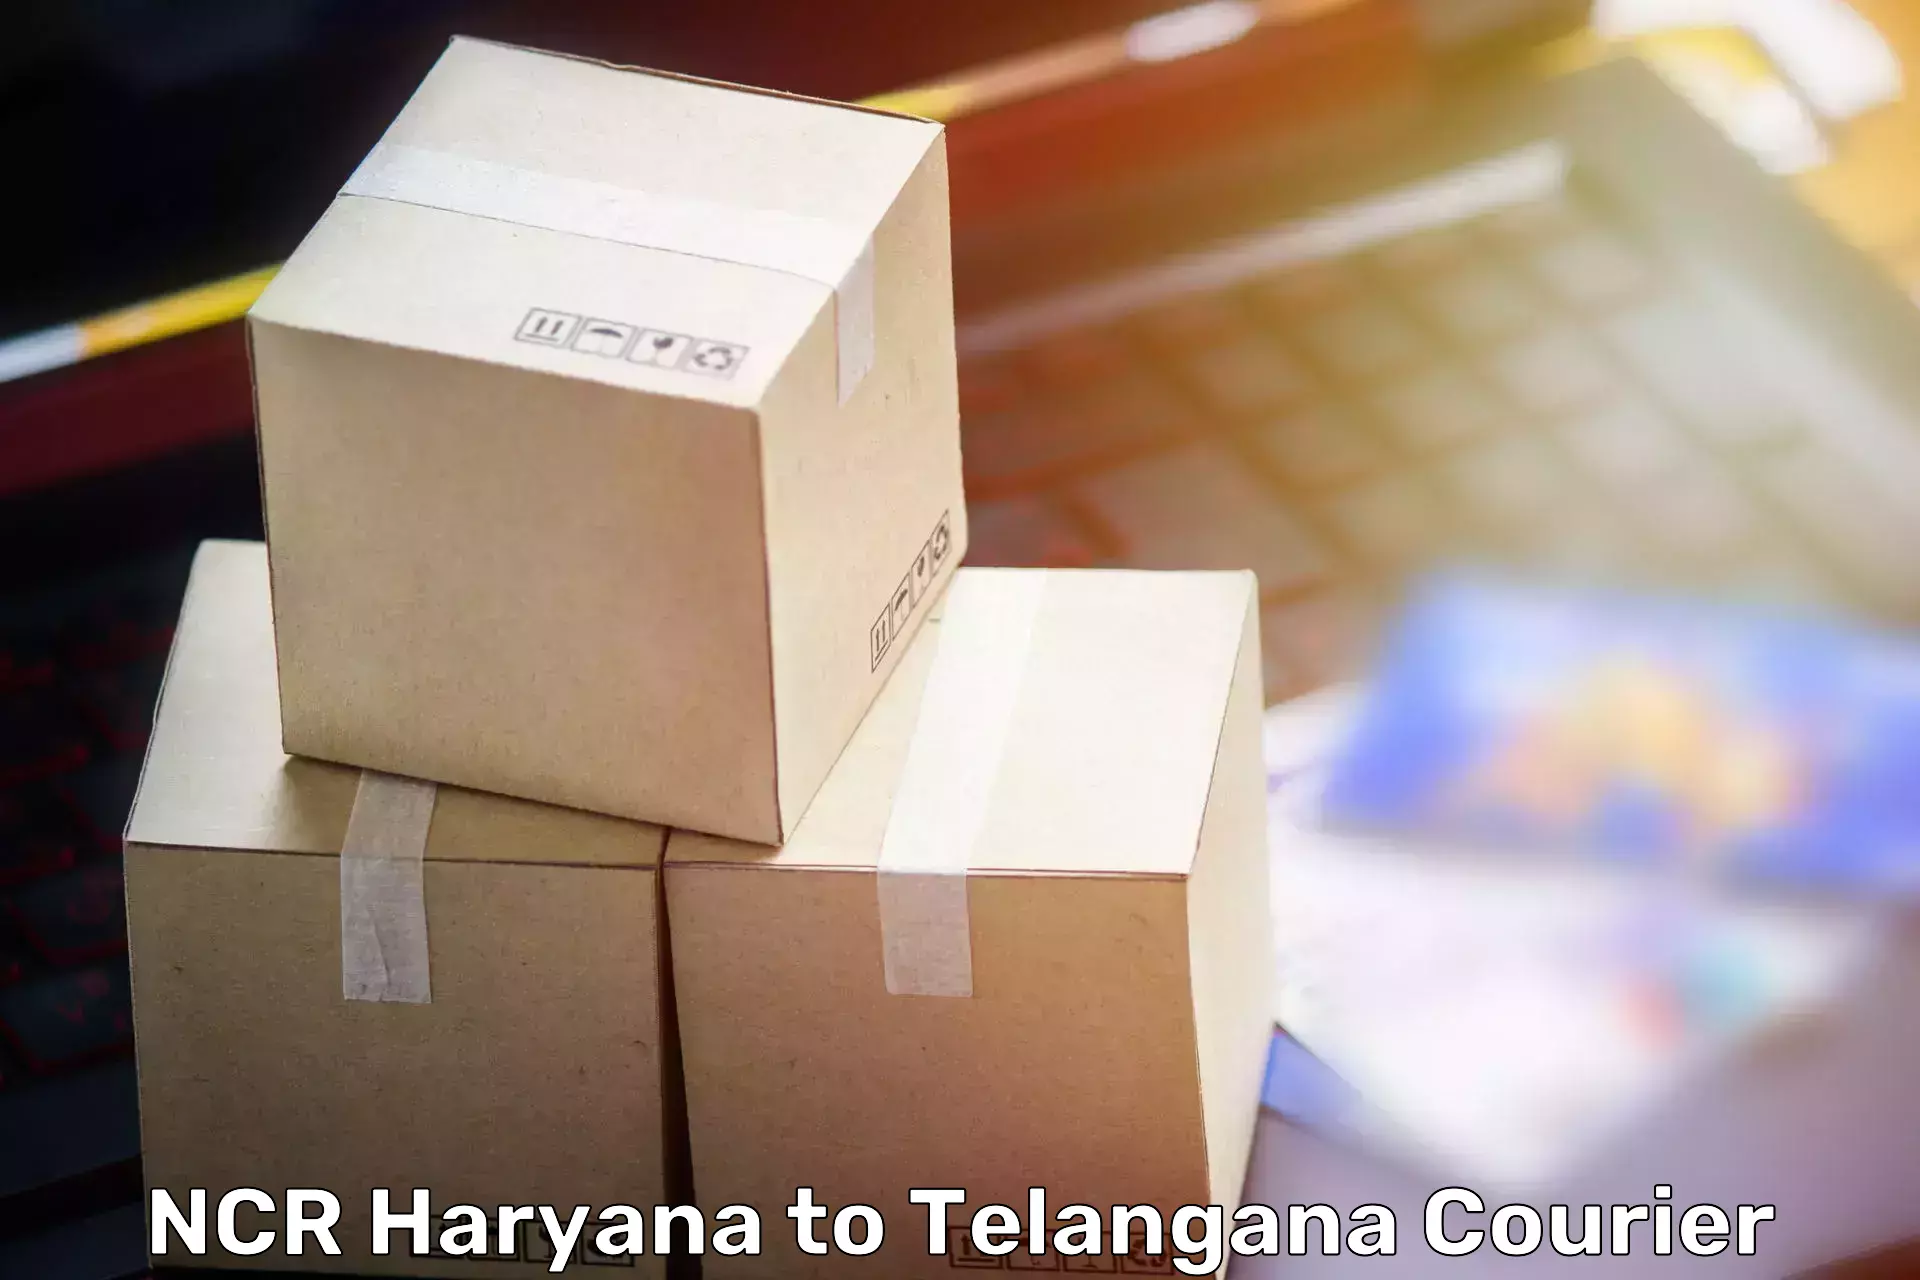 Professional moving assistance in NCR Haryana to International Institute of Information Technology Hyderabad